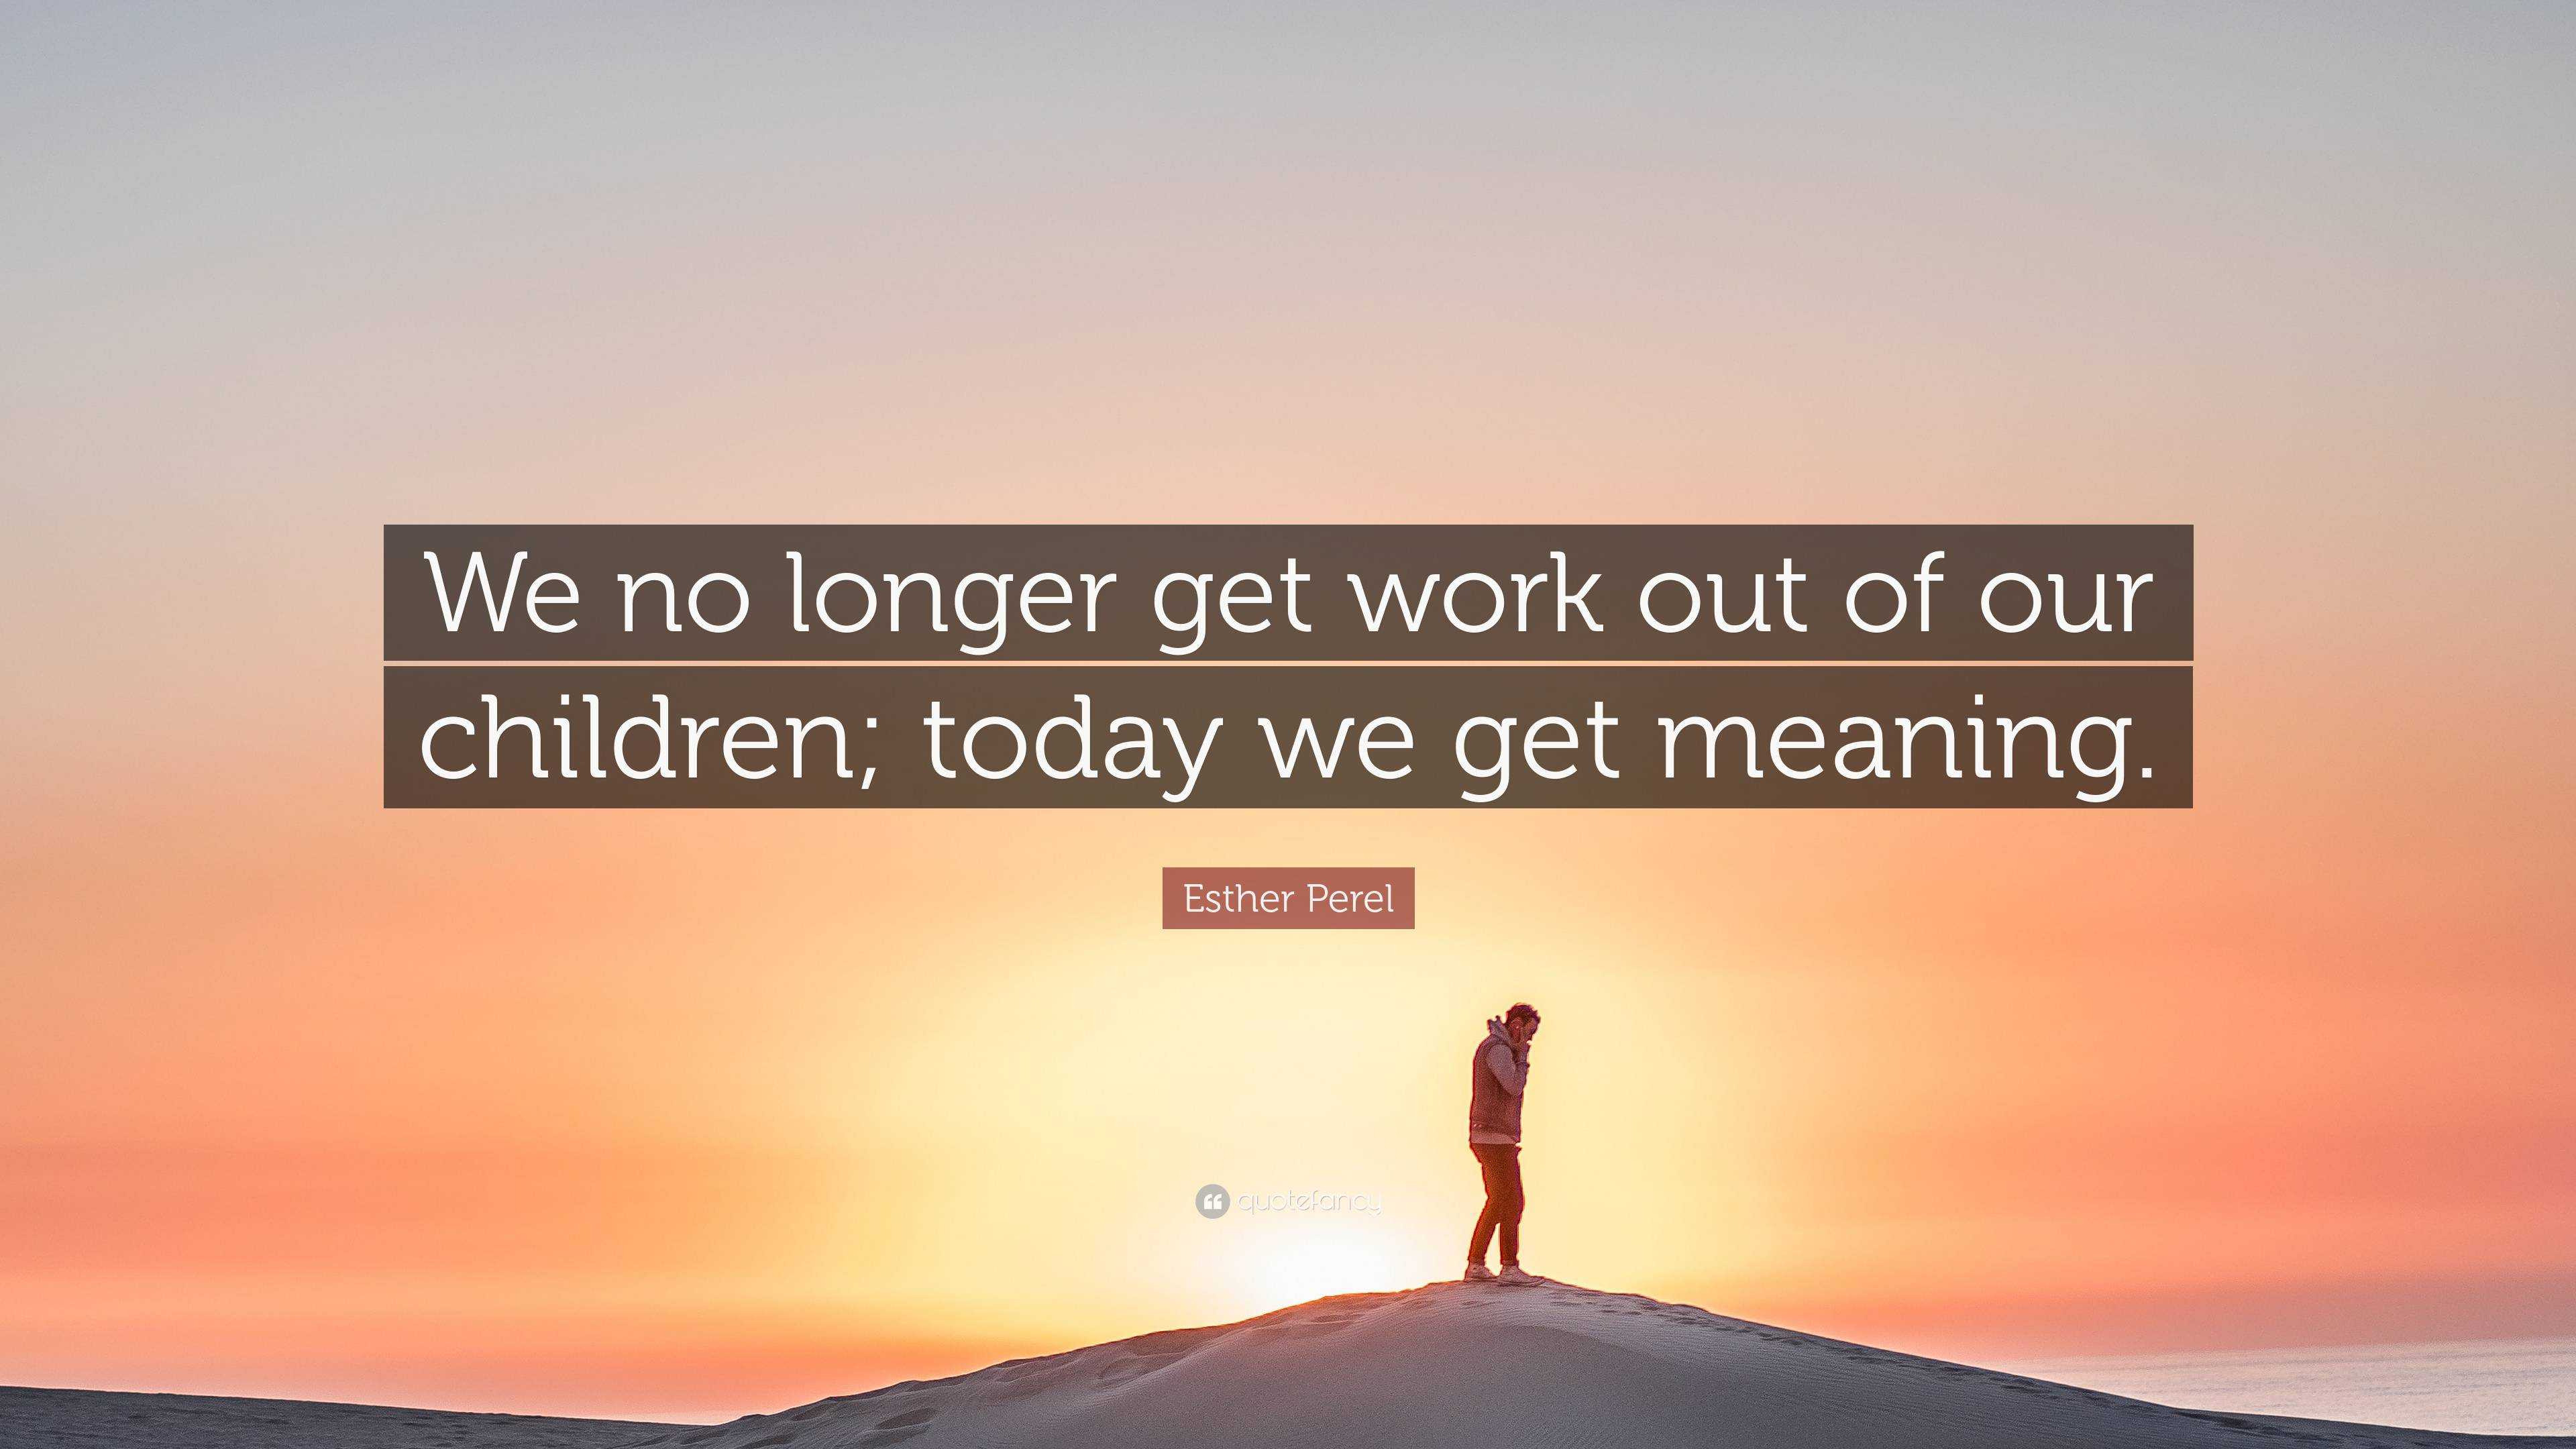 Esther Perel Quote: “We no longer get work out of our children